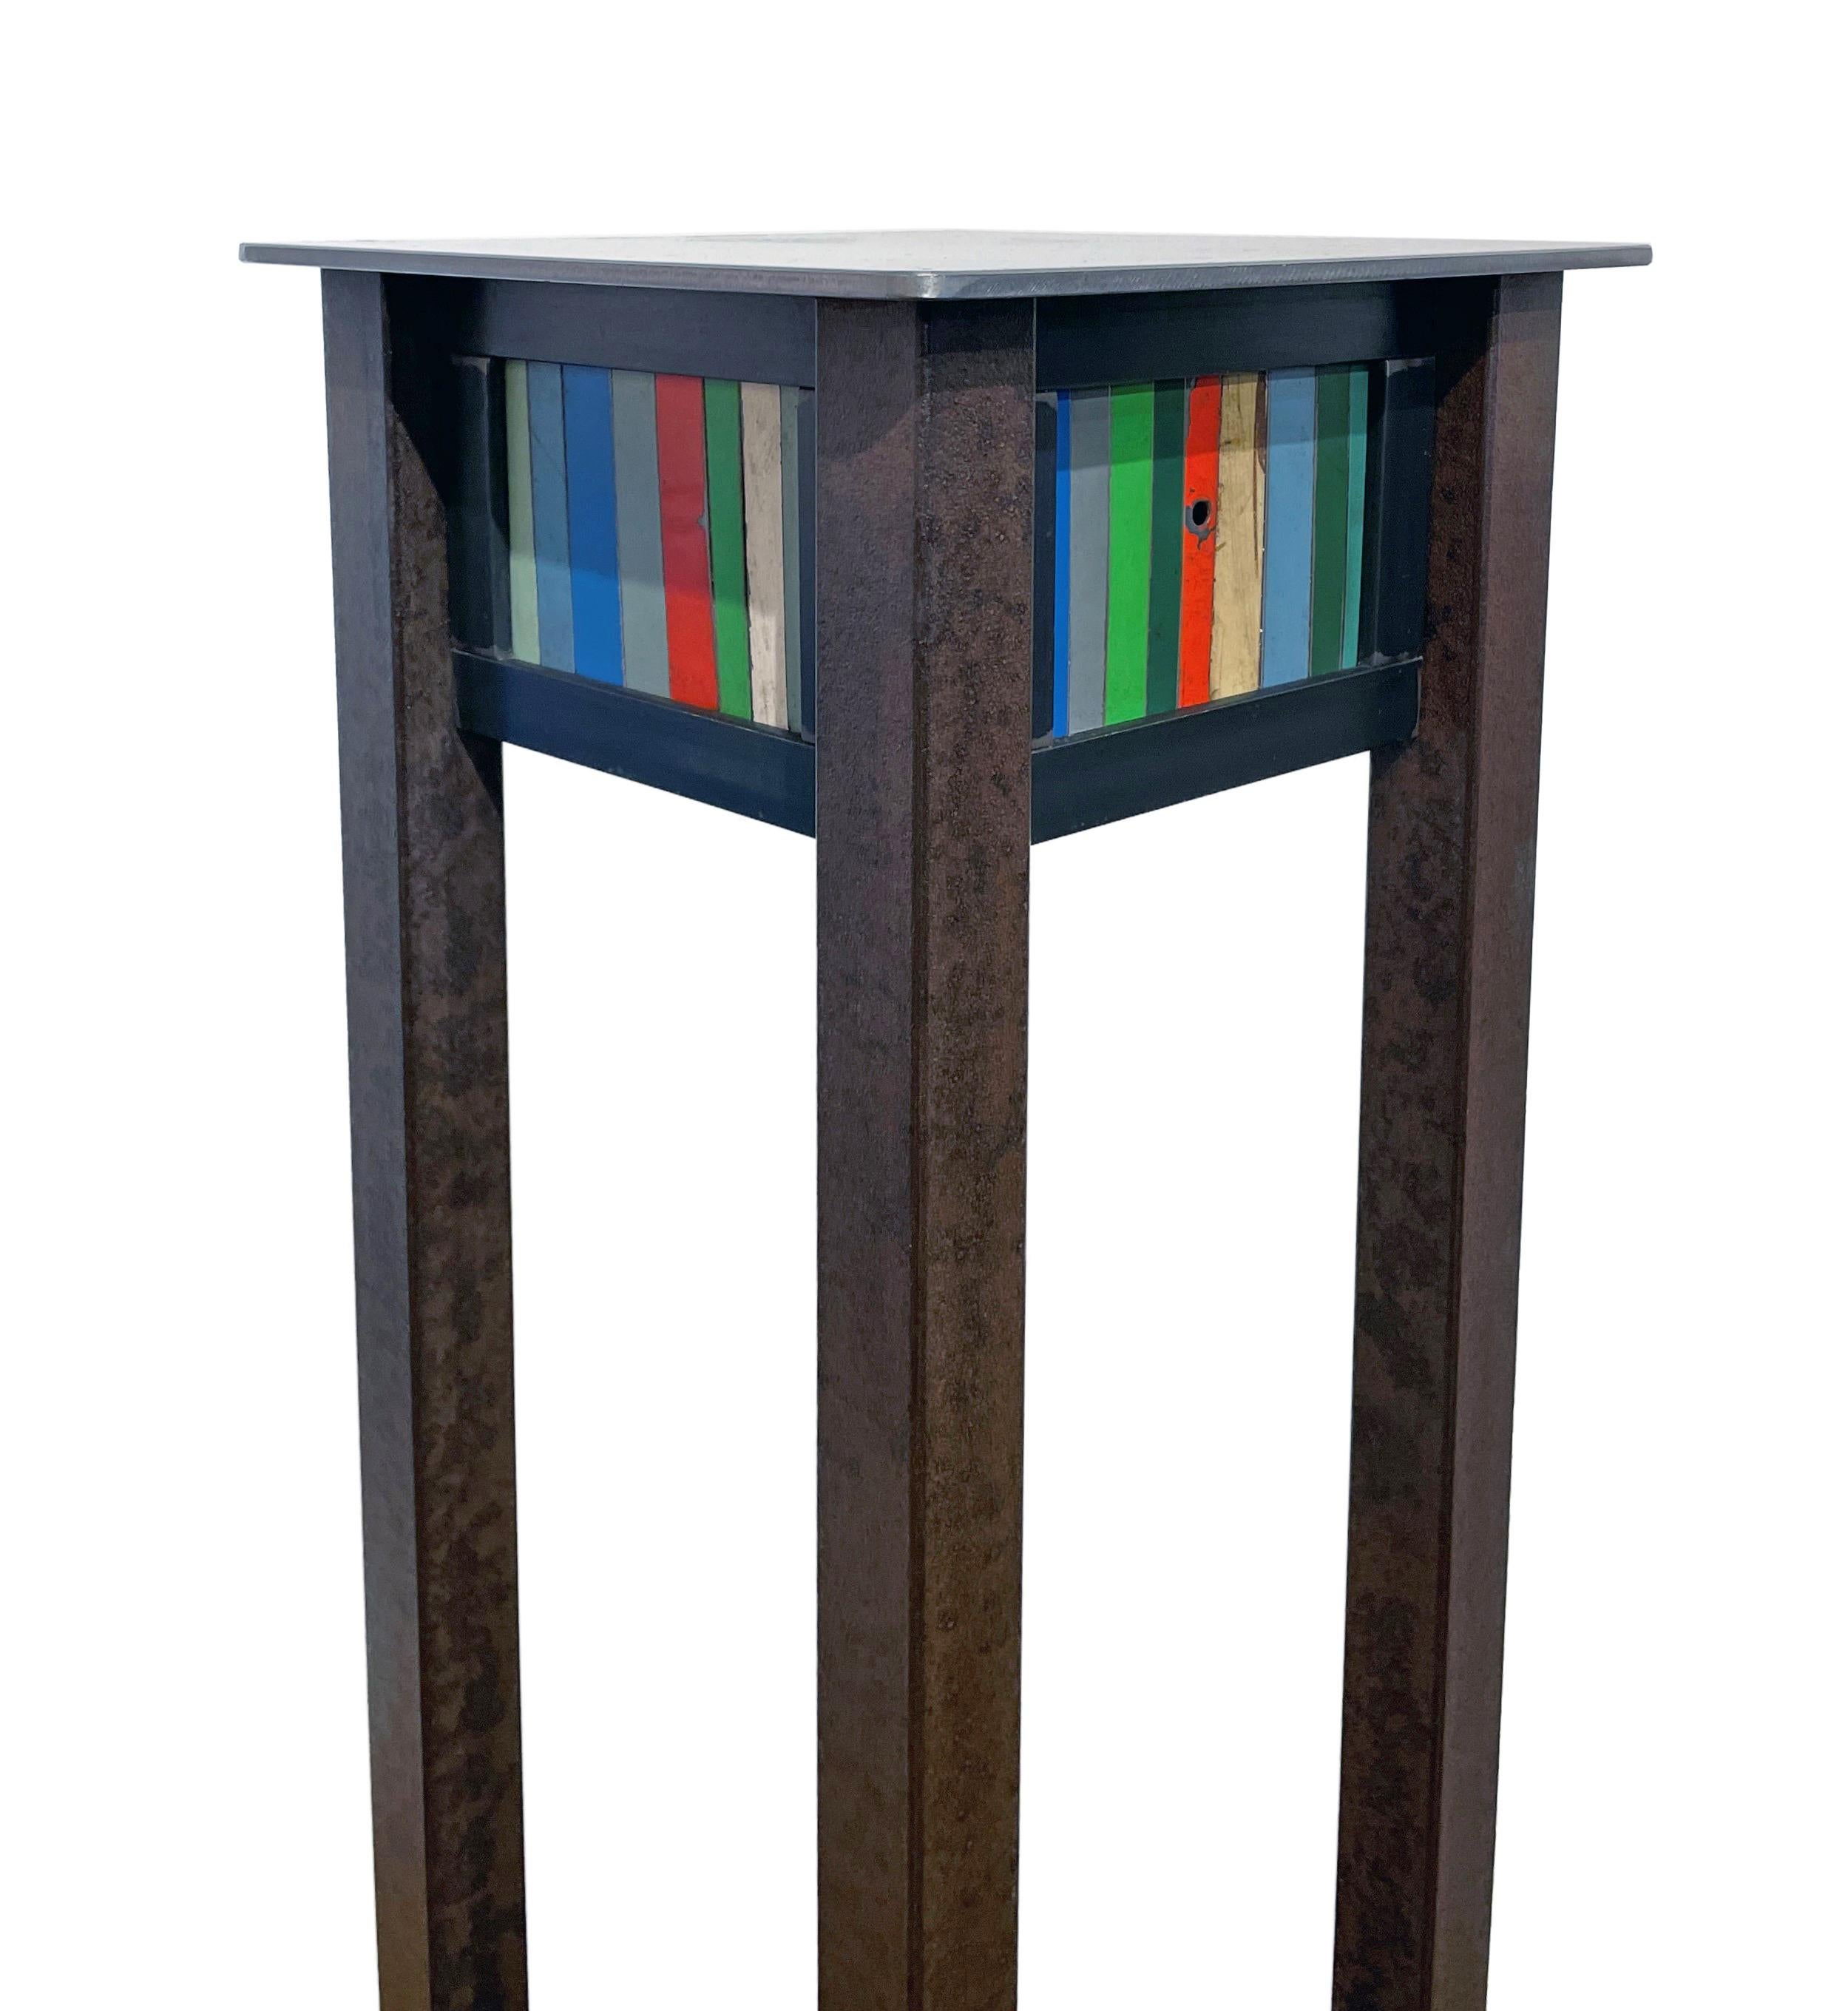 American Jim Rose Steel Pedestal, Welded Steel with Shelf, Brightly Colored Quilt Pattern